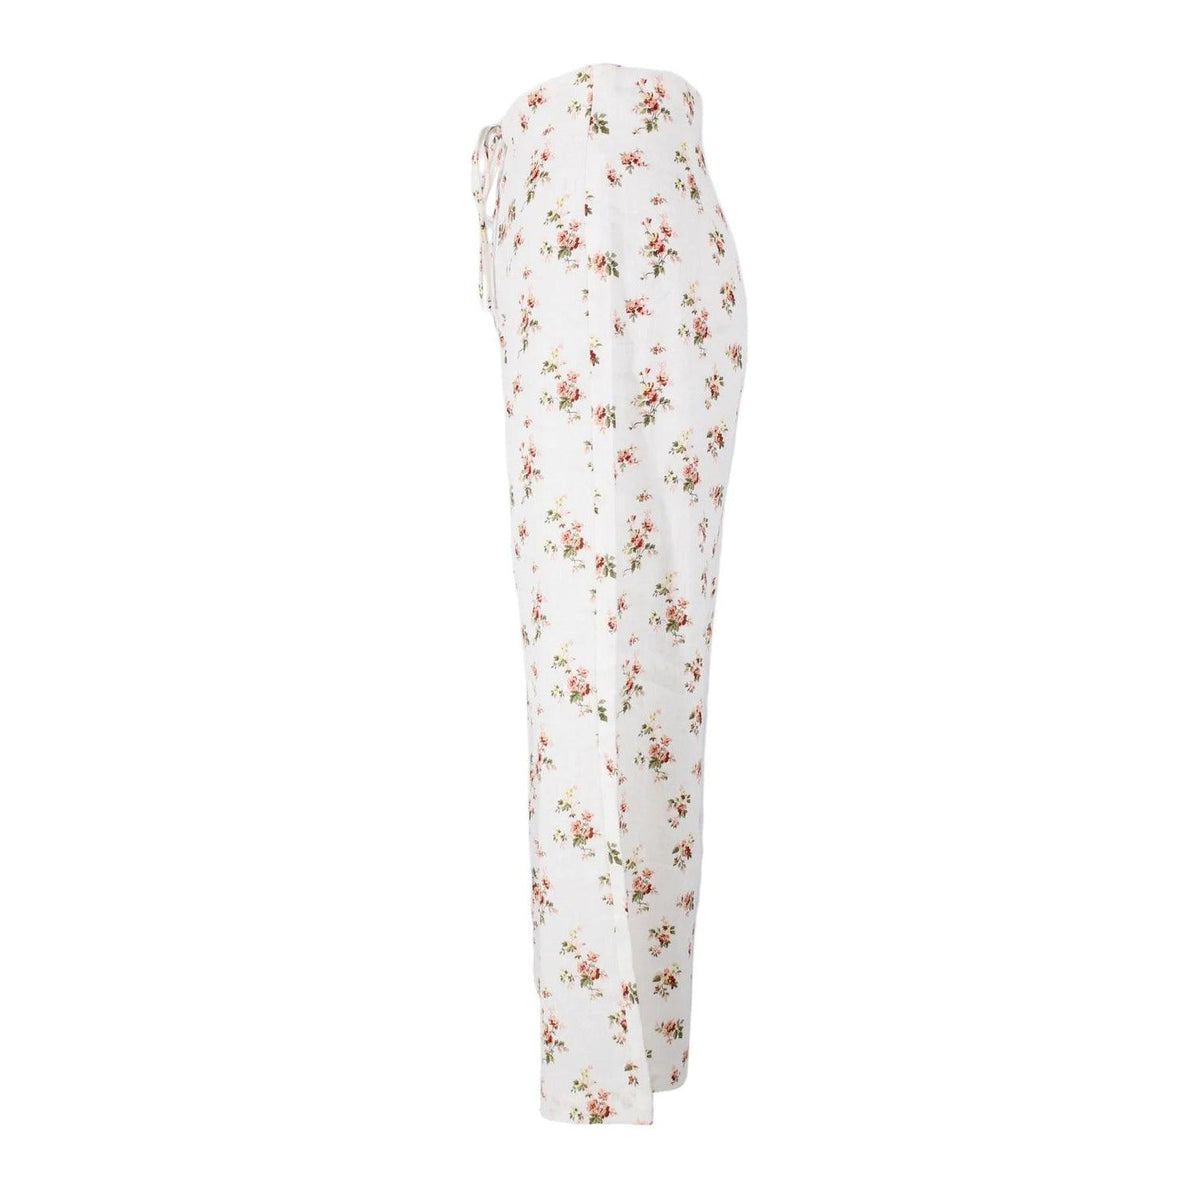 Pre-Owned REFORMATION White Floral Linen Pants | Size 4 - theREMODA